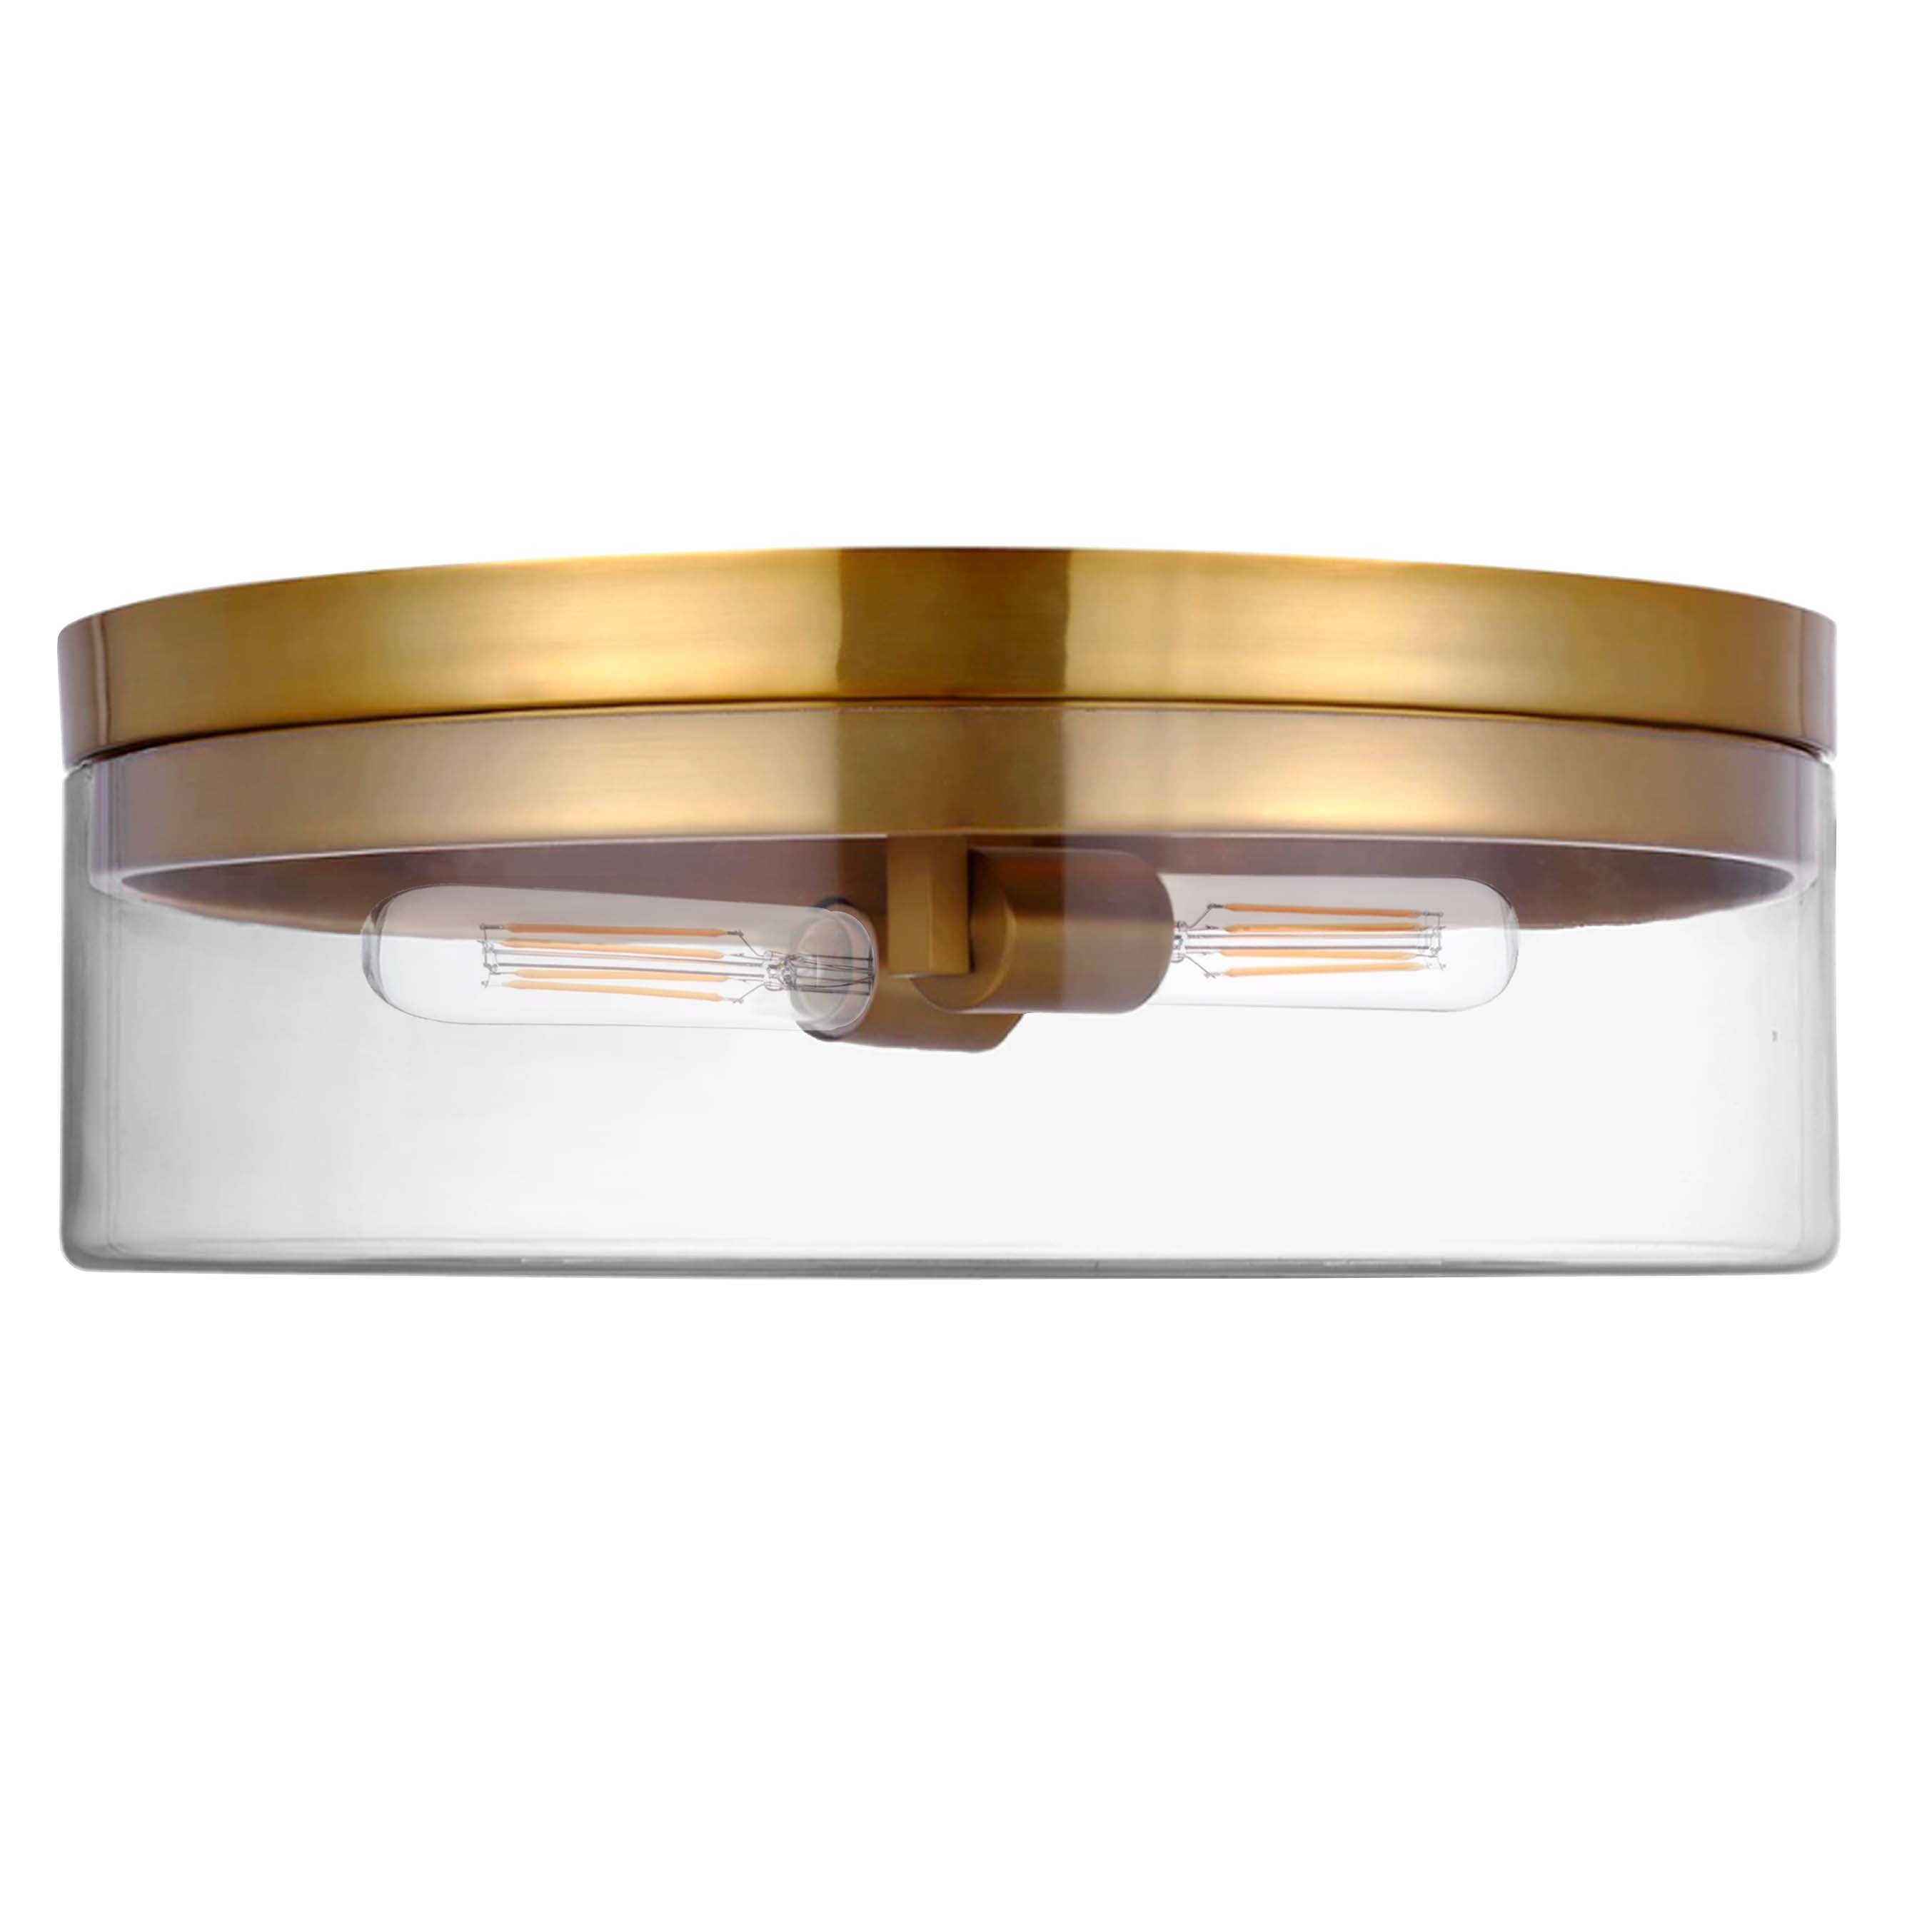 Dainolite FNA-142FH-AGB-CLR 2 Light Incandescent Flush Mount Aged Brass with Clear Glass